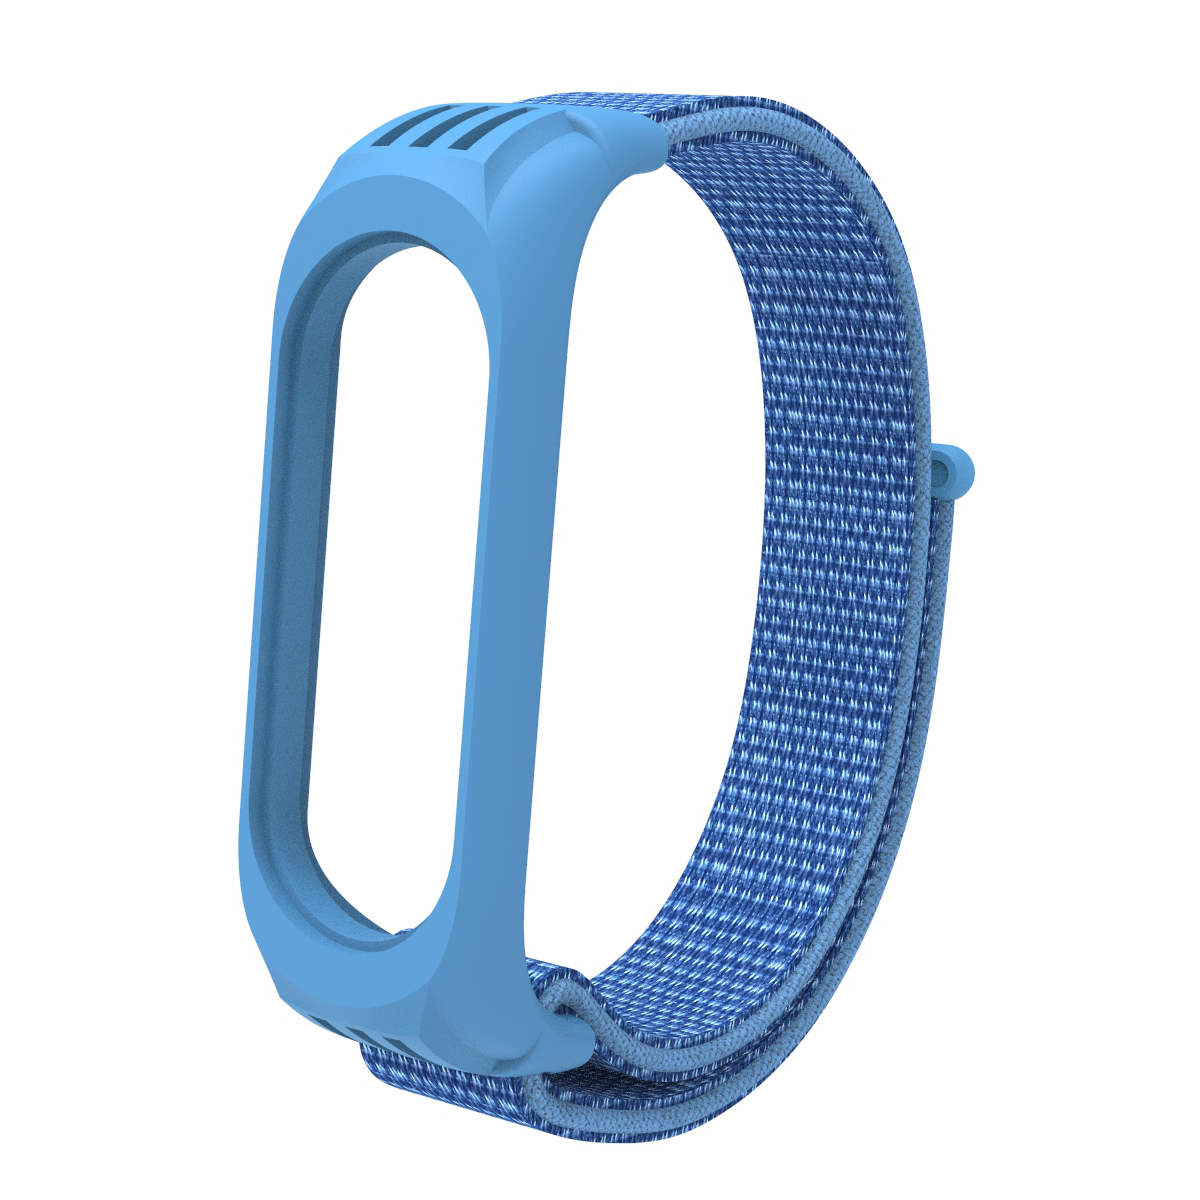 Holdmi-2-IN-1-Comfortable-Nylon-Watch-Strap-Band--TPU-Watch-Case-Cover-Replacement-for-Xiaomi-Mi-Ban-1758522-17